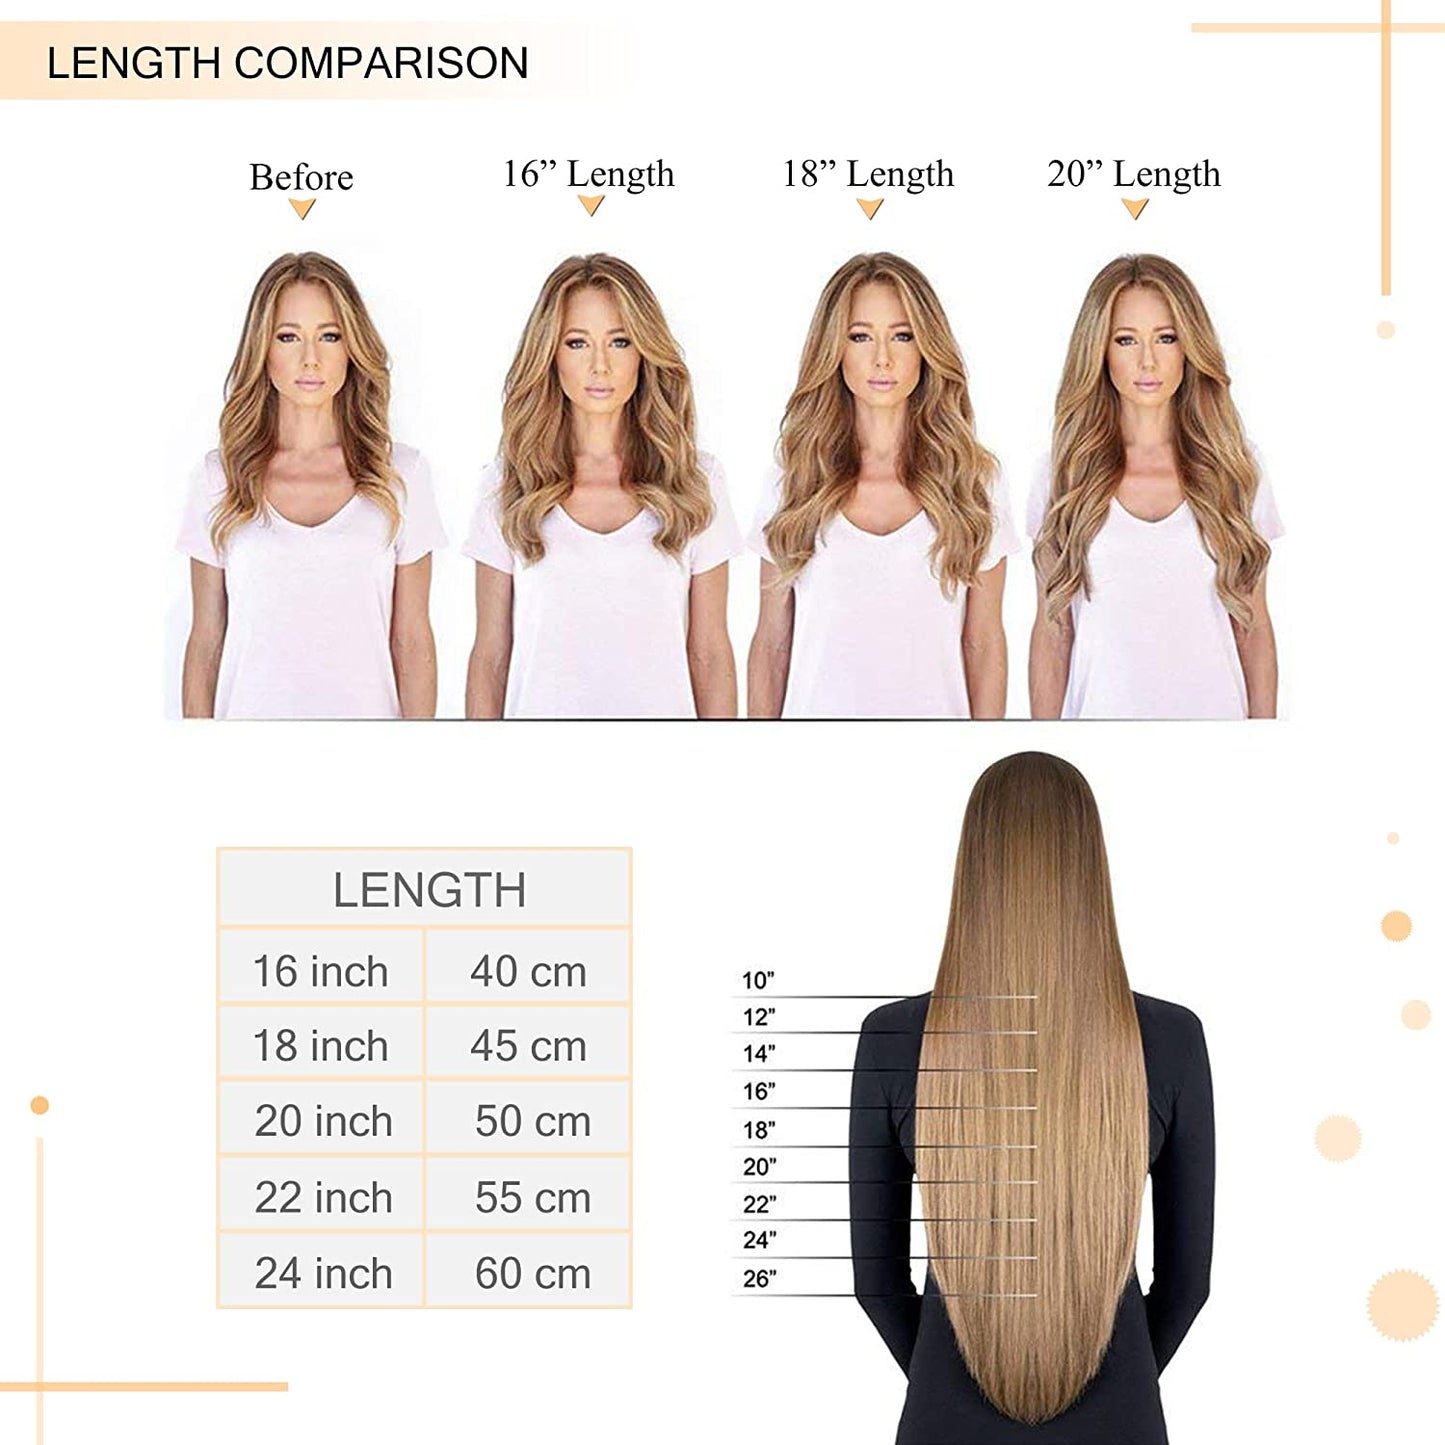 50G BODY WAVE TAPE-INS INVISABLE SEAMLESS | Real Natural 100% Remy Human Hair Weft Double Sided Tape-In Hair For Women Ready to Wear Extensions